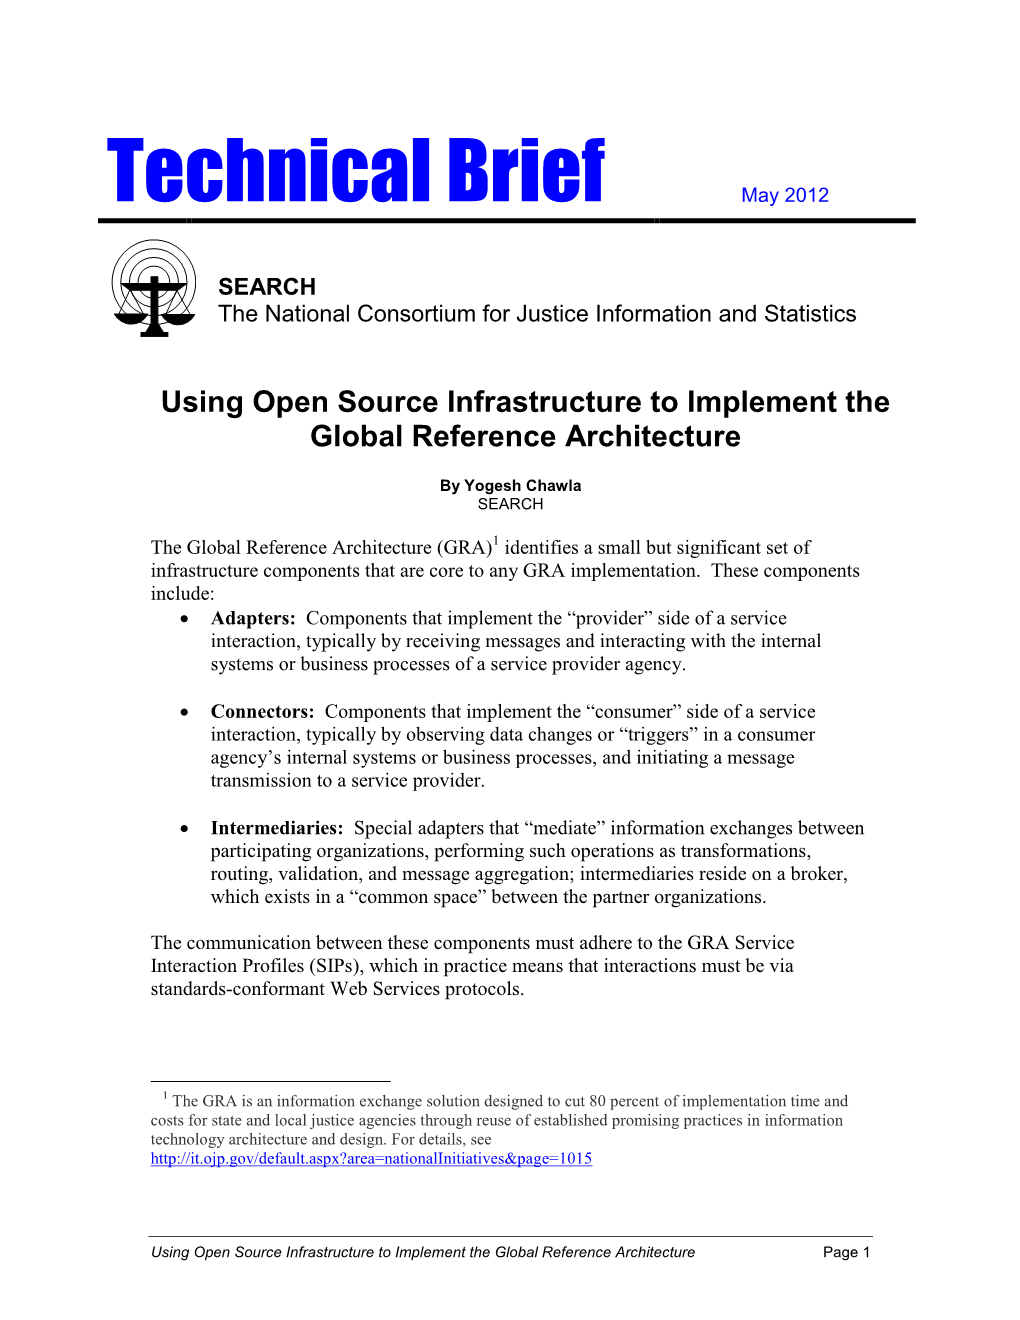 Technical Brief-Using Open Source Infrastructure to Implement The